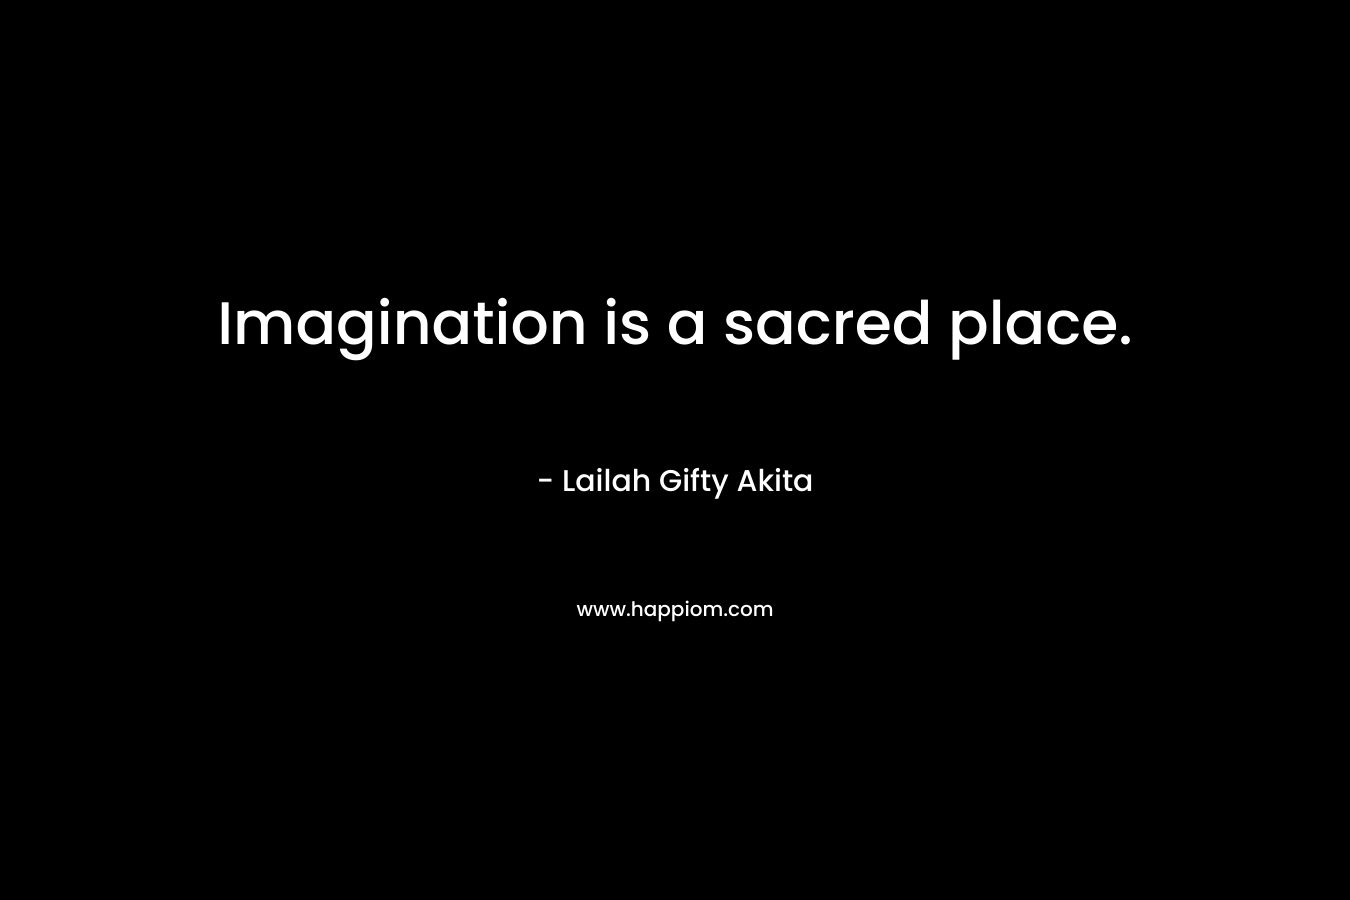 Imagination is a sacred place.